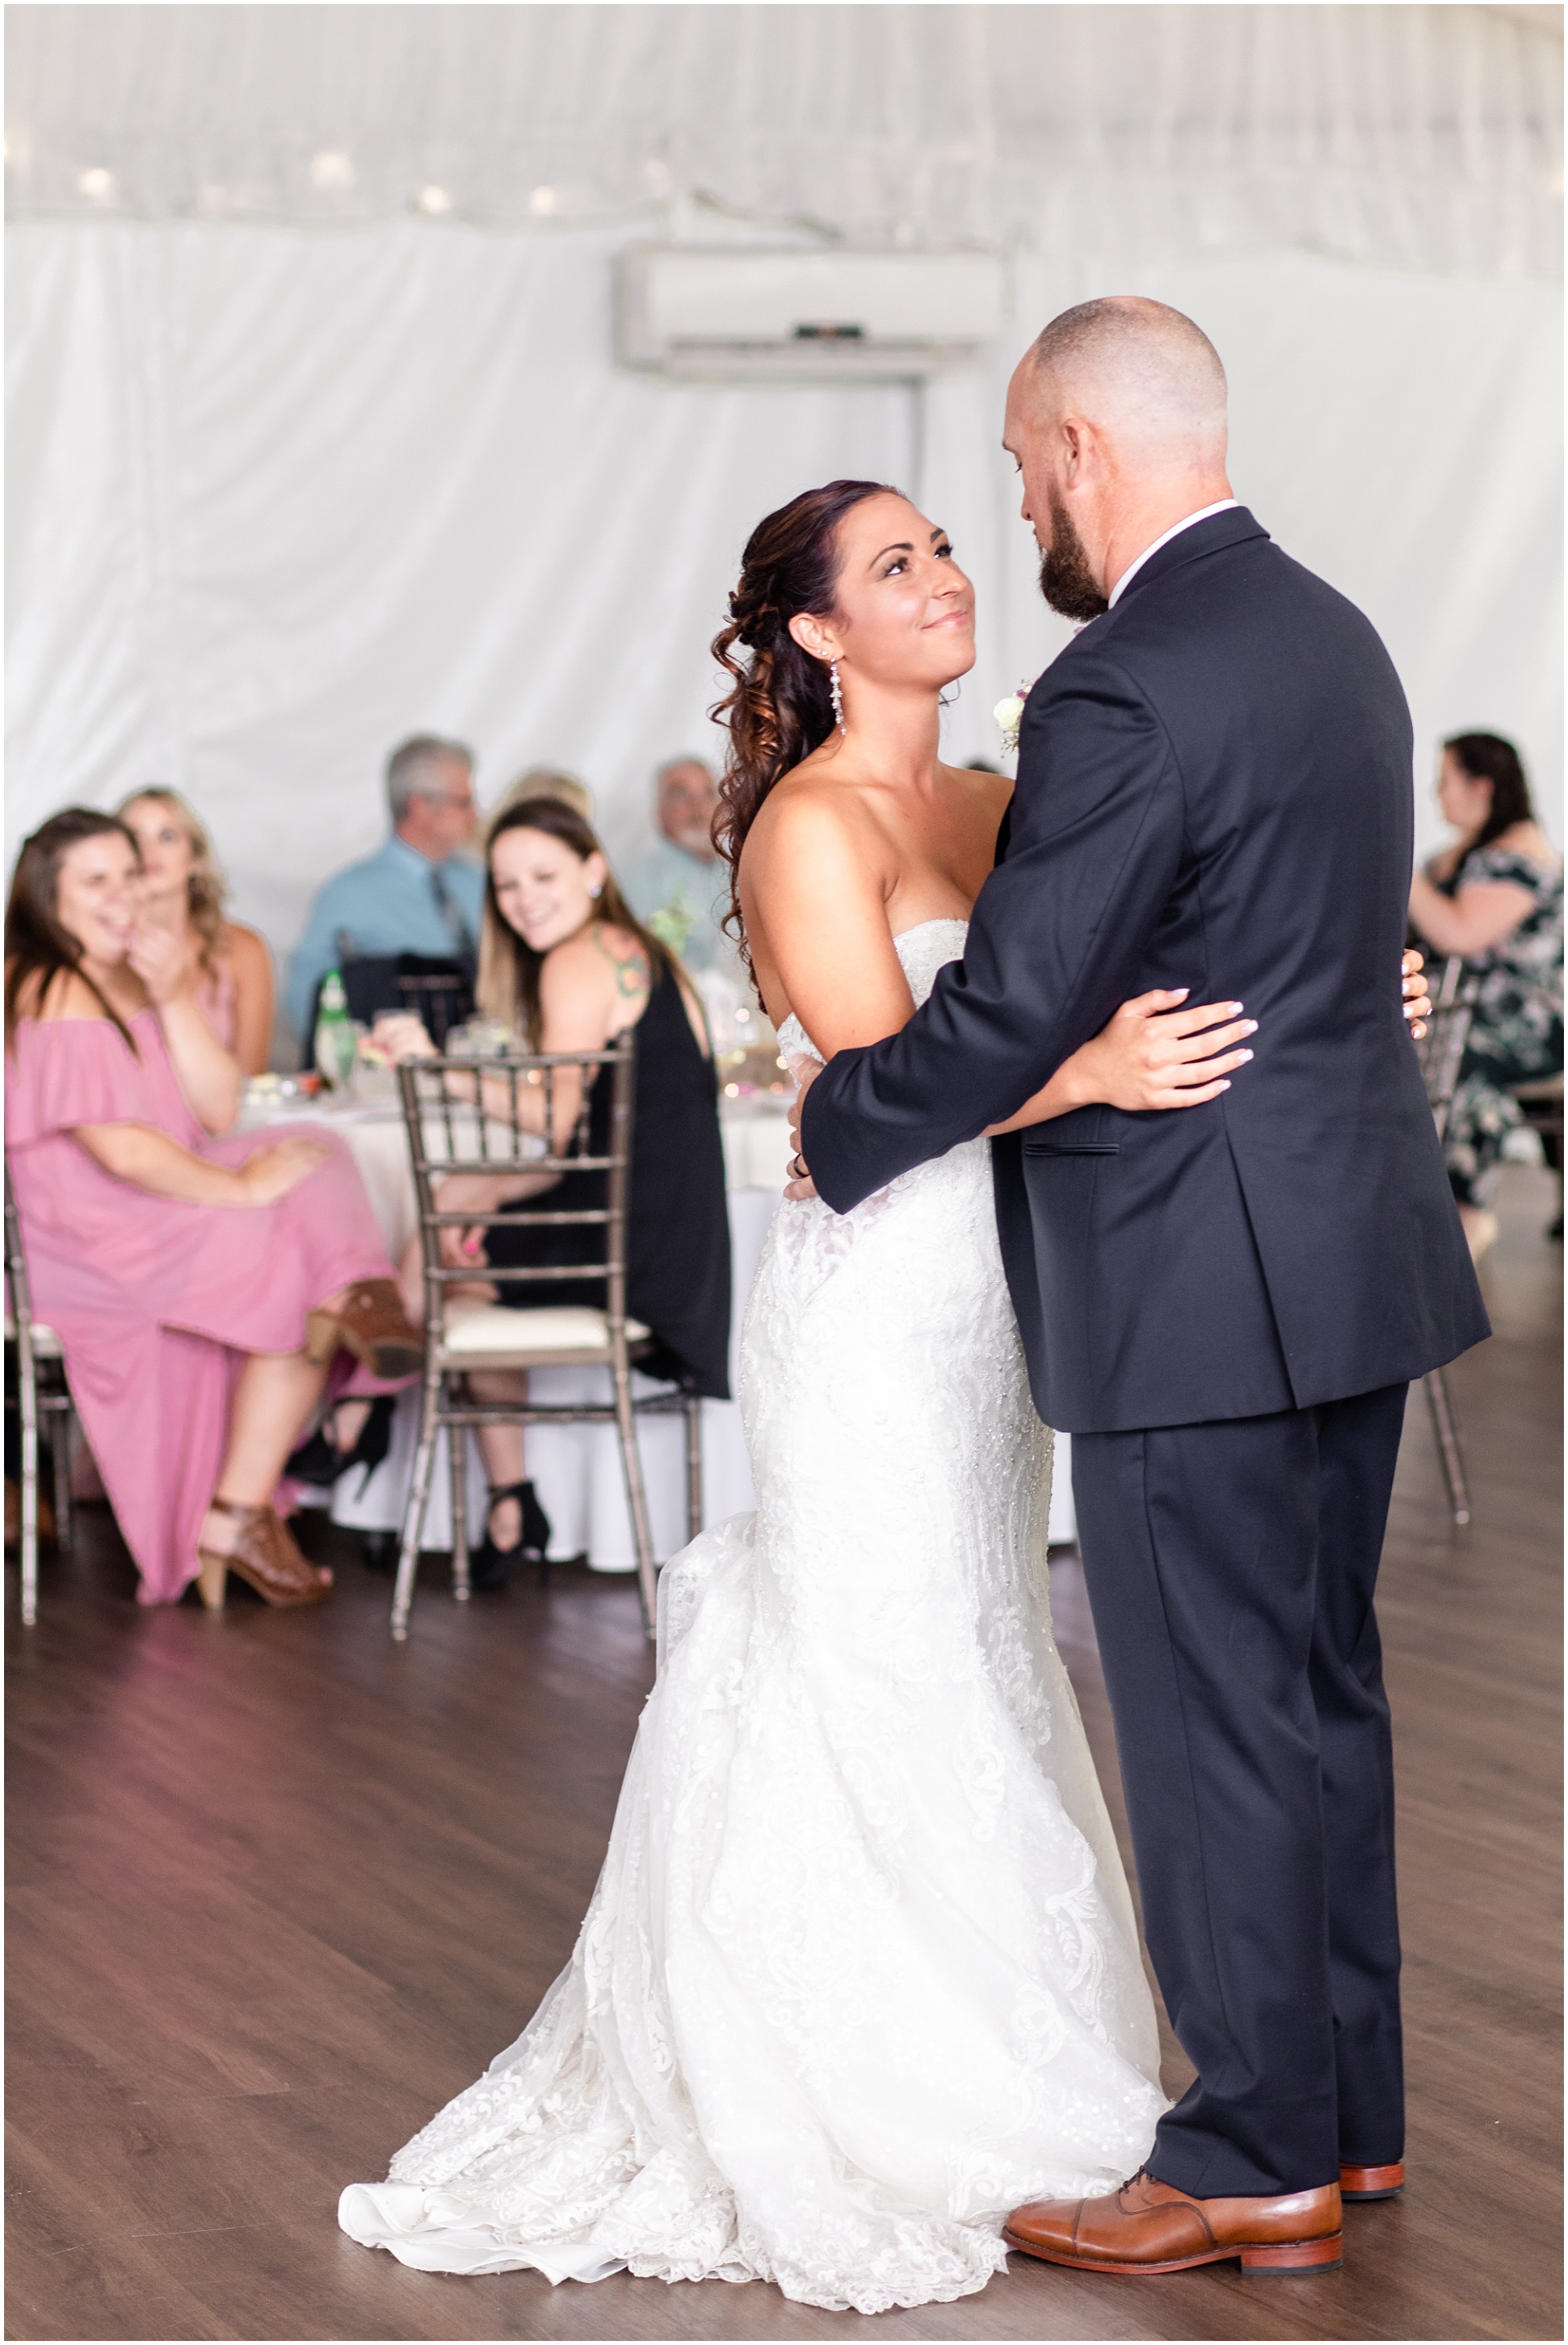 The First Dance for Brooke and Patrick Keim at Mountain Branch